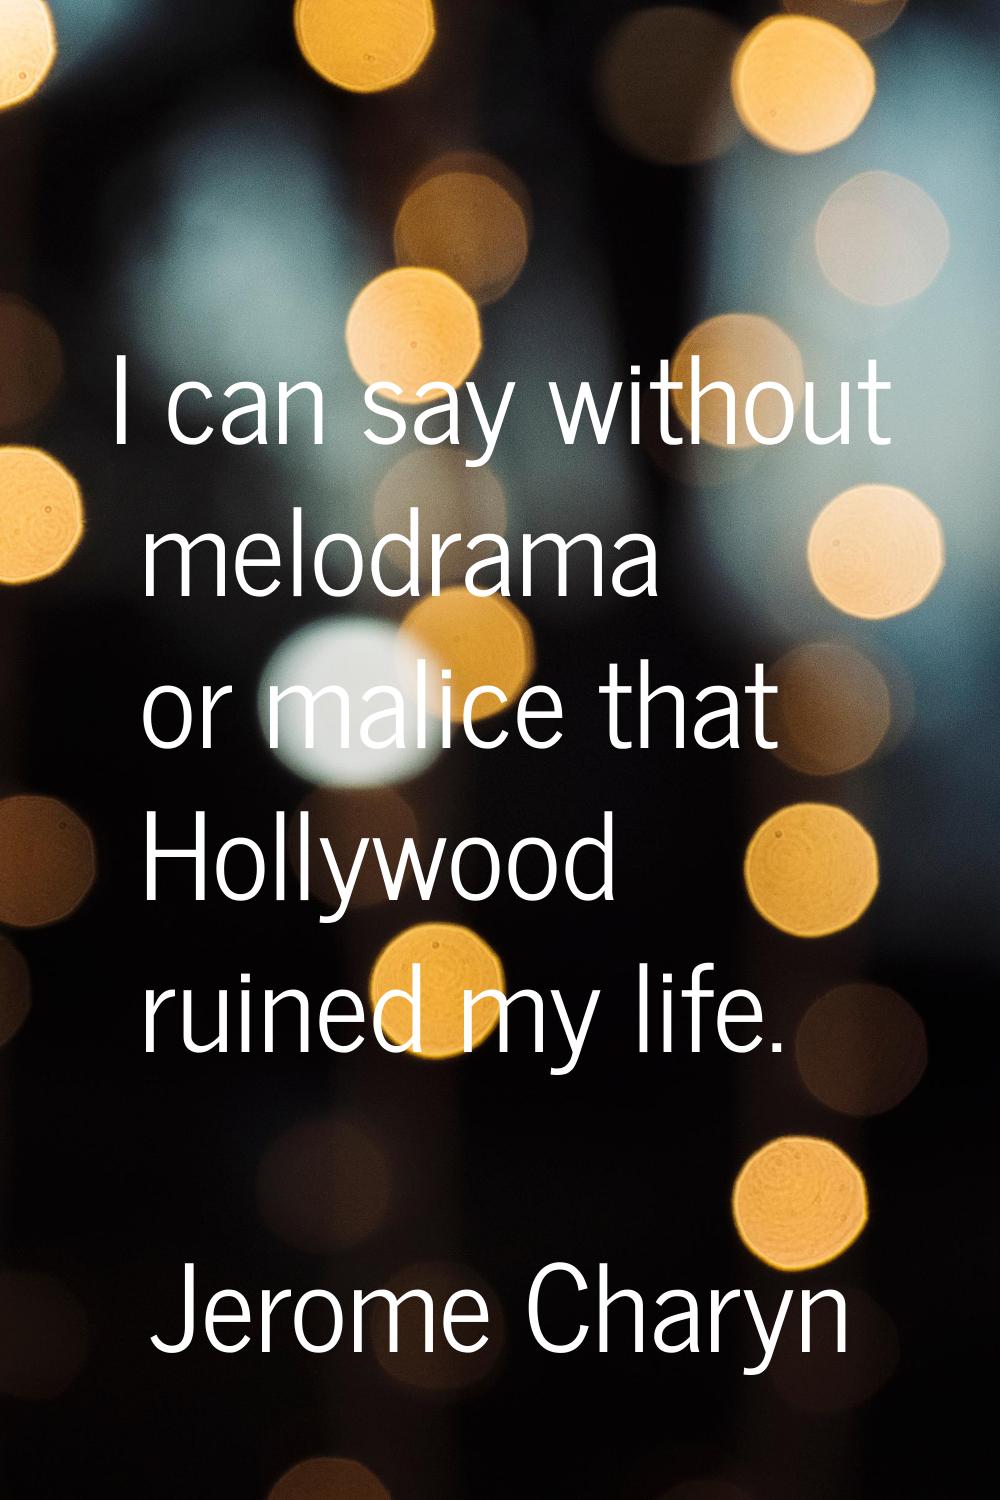 I can say without melodrama or malice that Hollywood ruined my life.